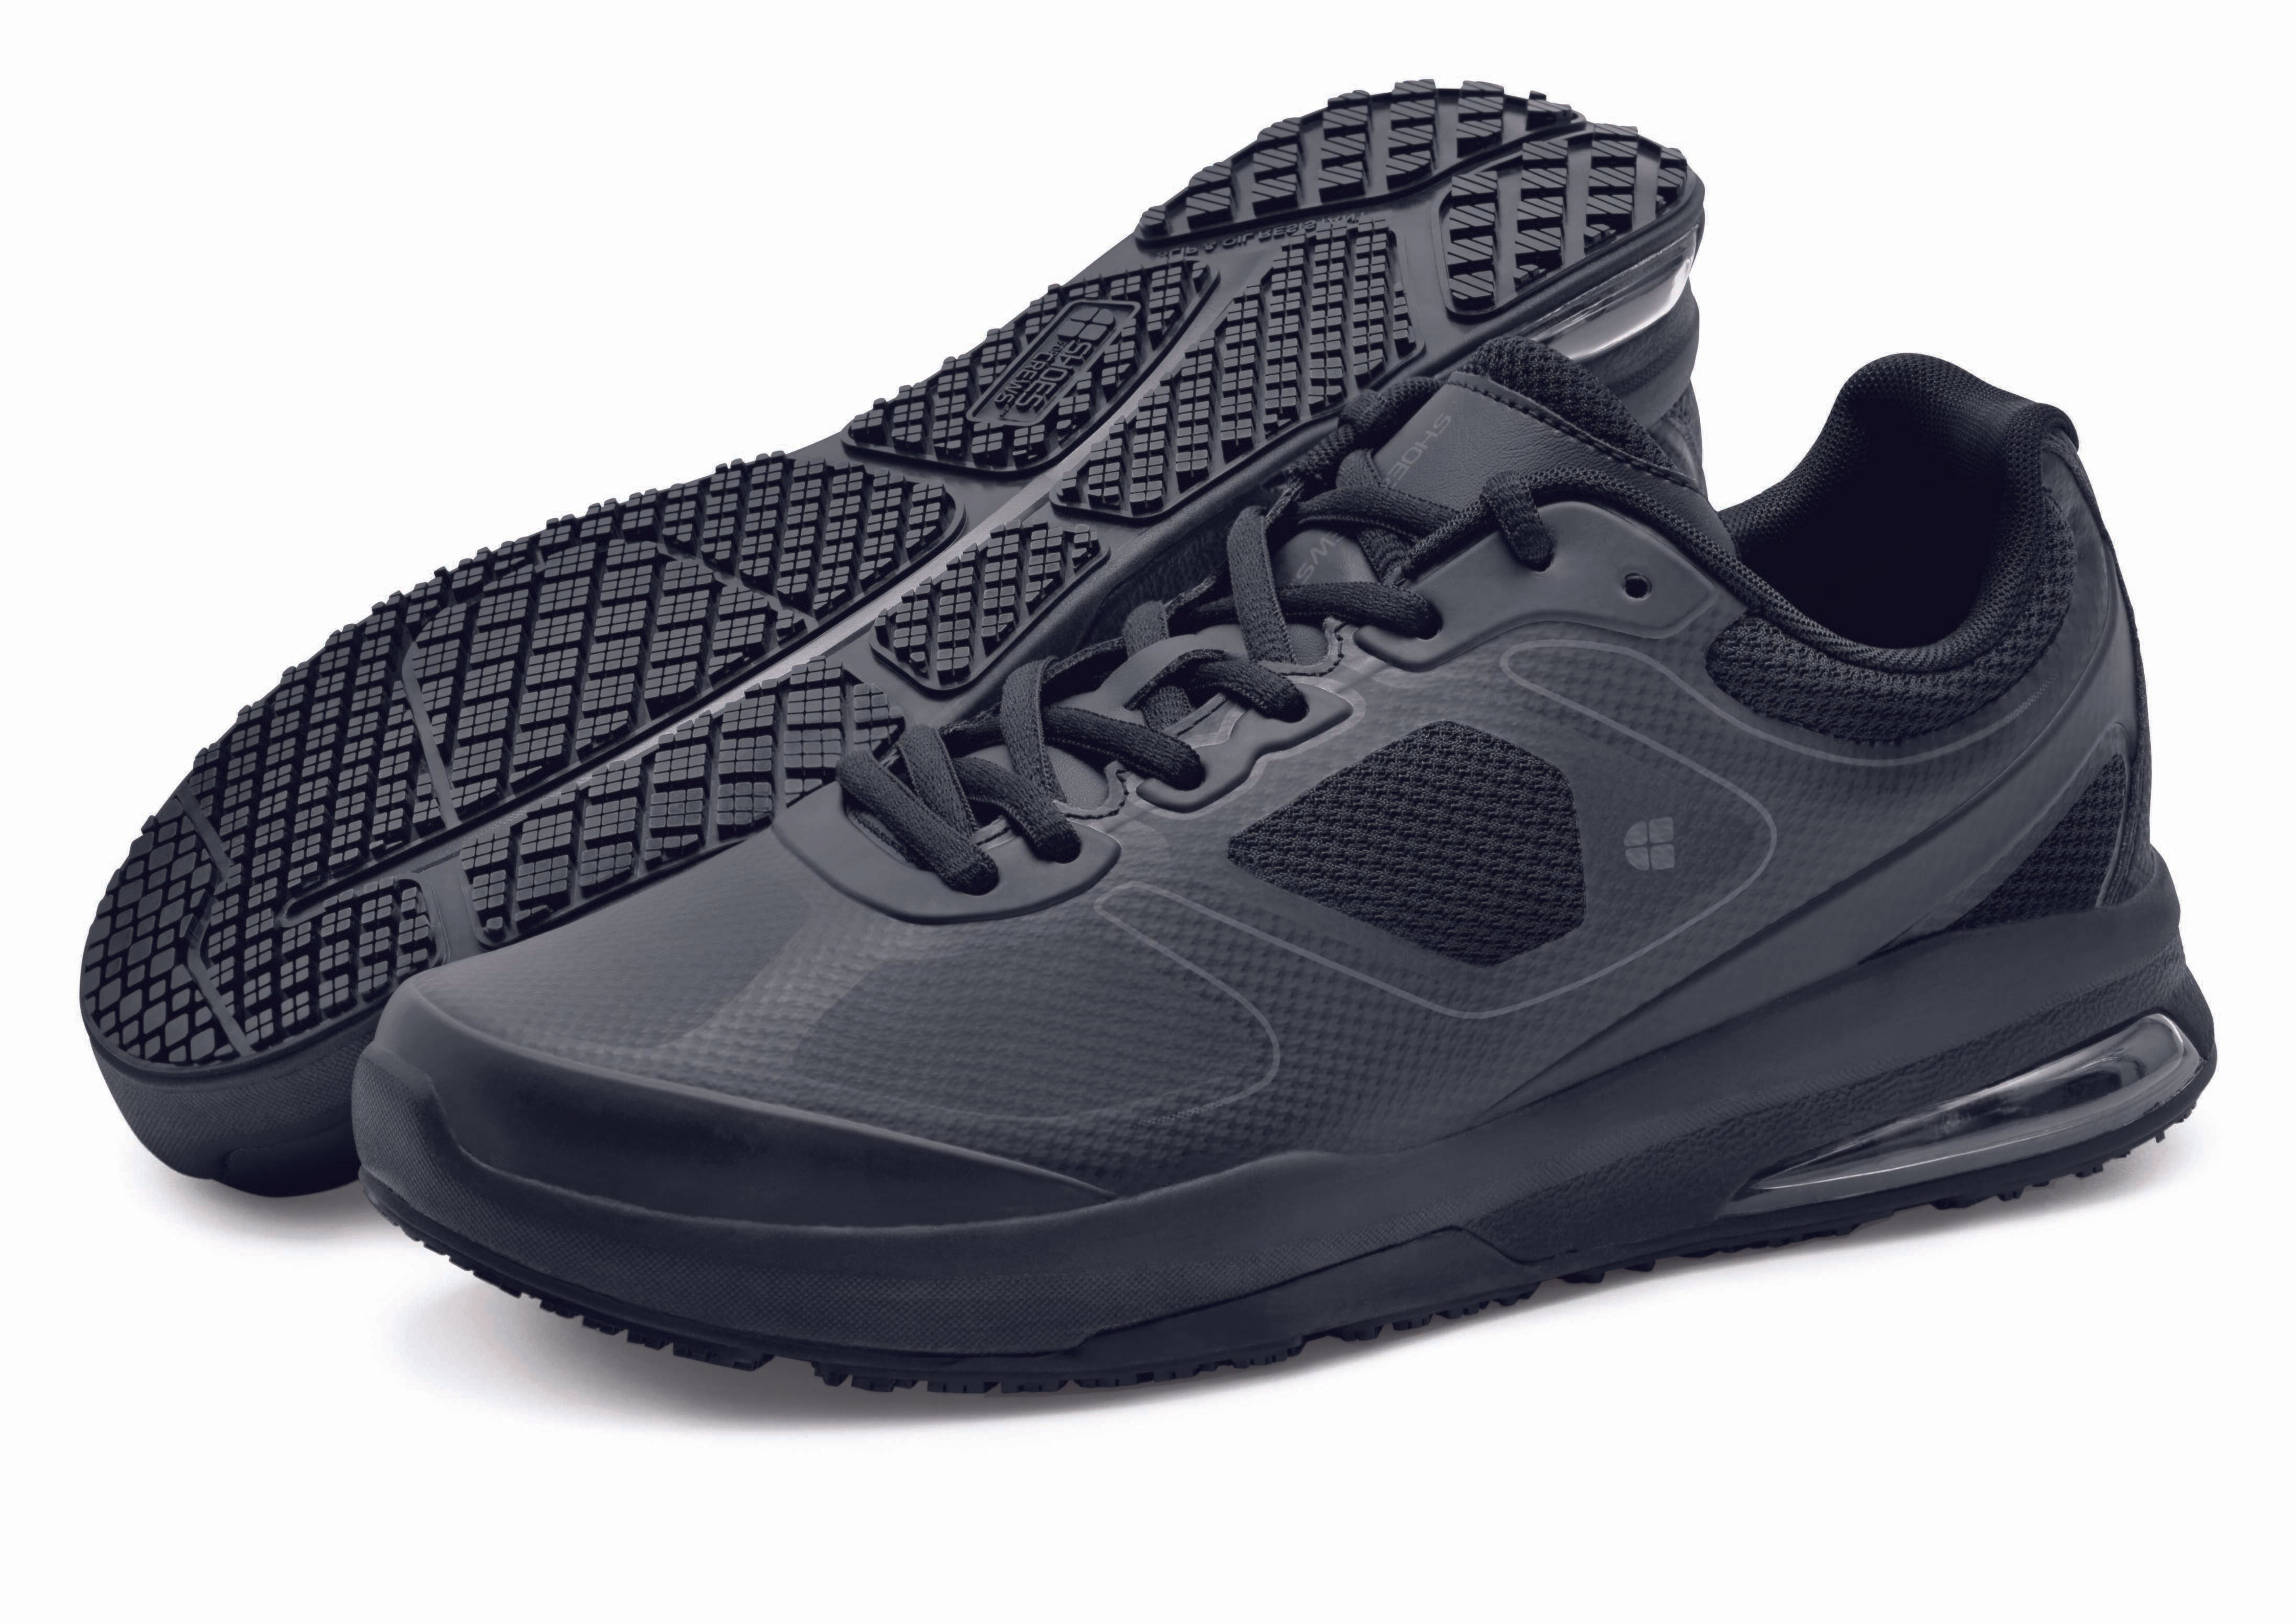 The Revolution II Black from Shoes For Crews are slip-resistant trainers designed to provide comfort, pair seen from the left side and the sole.